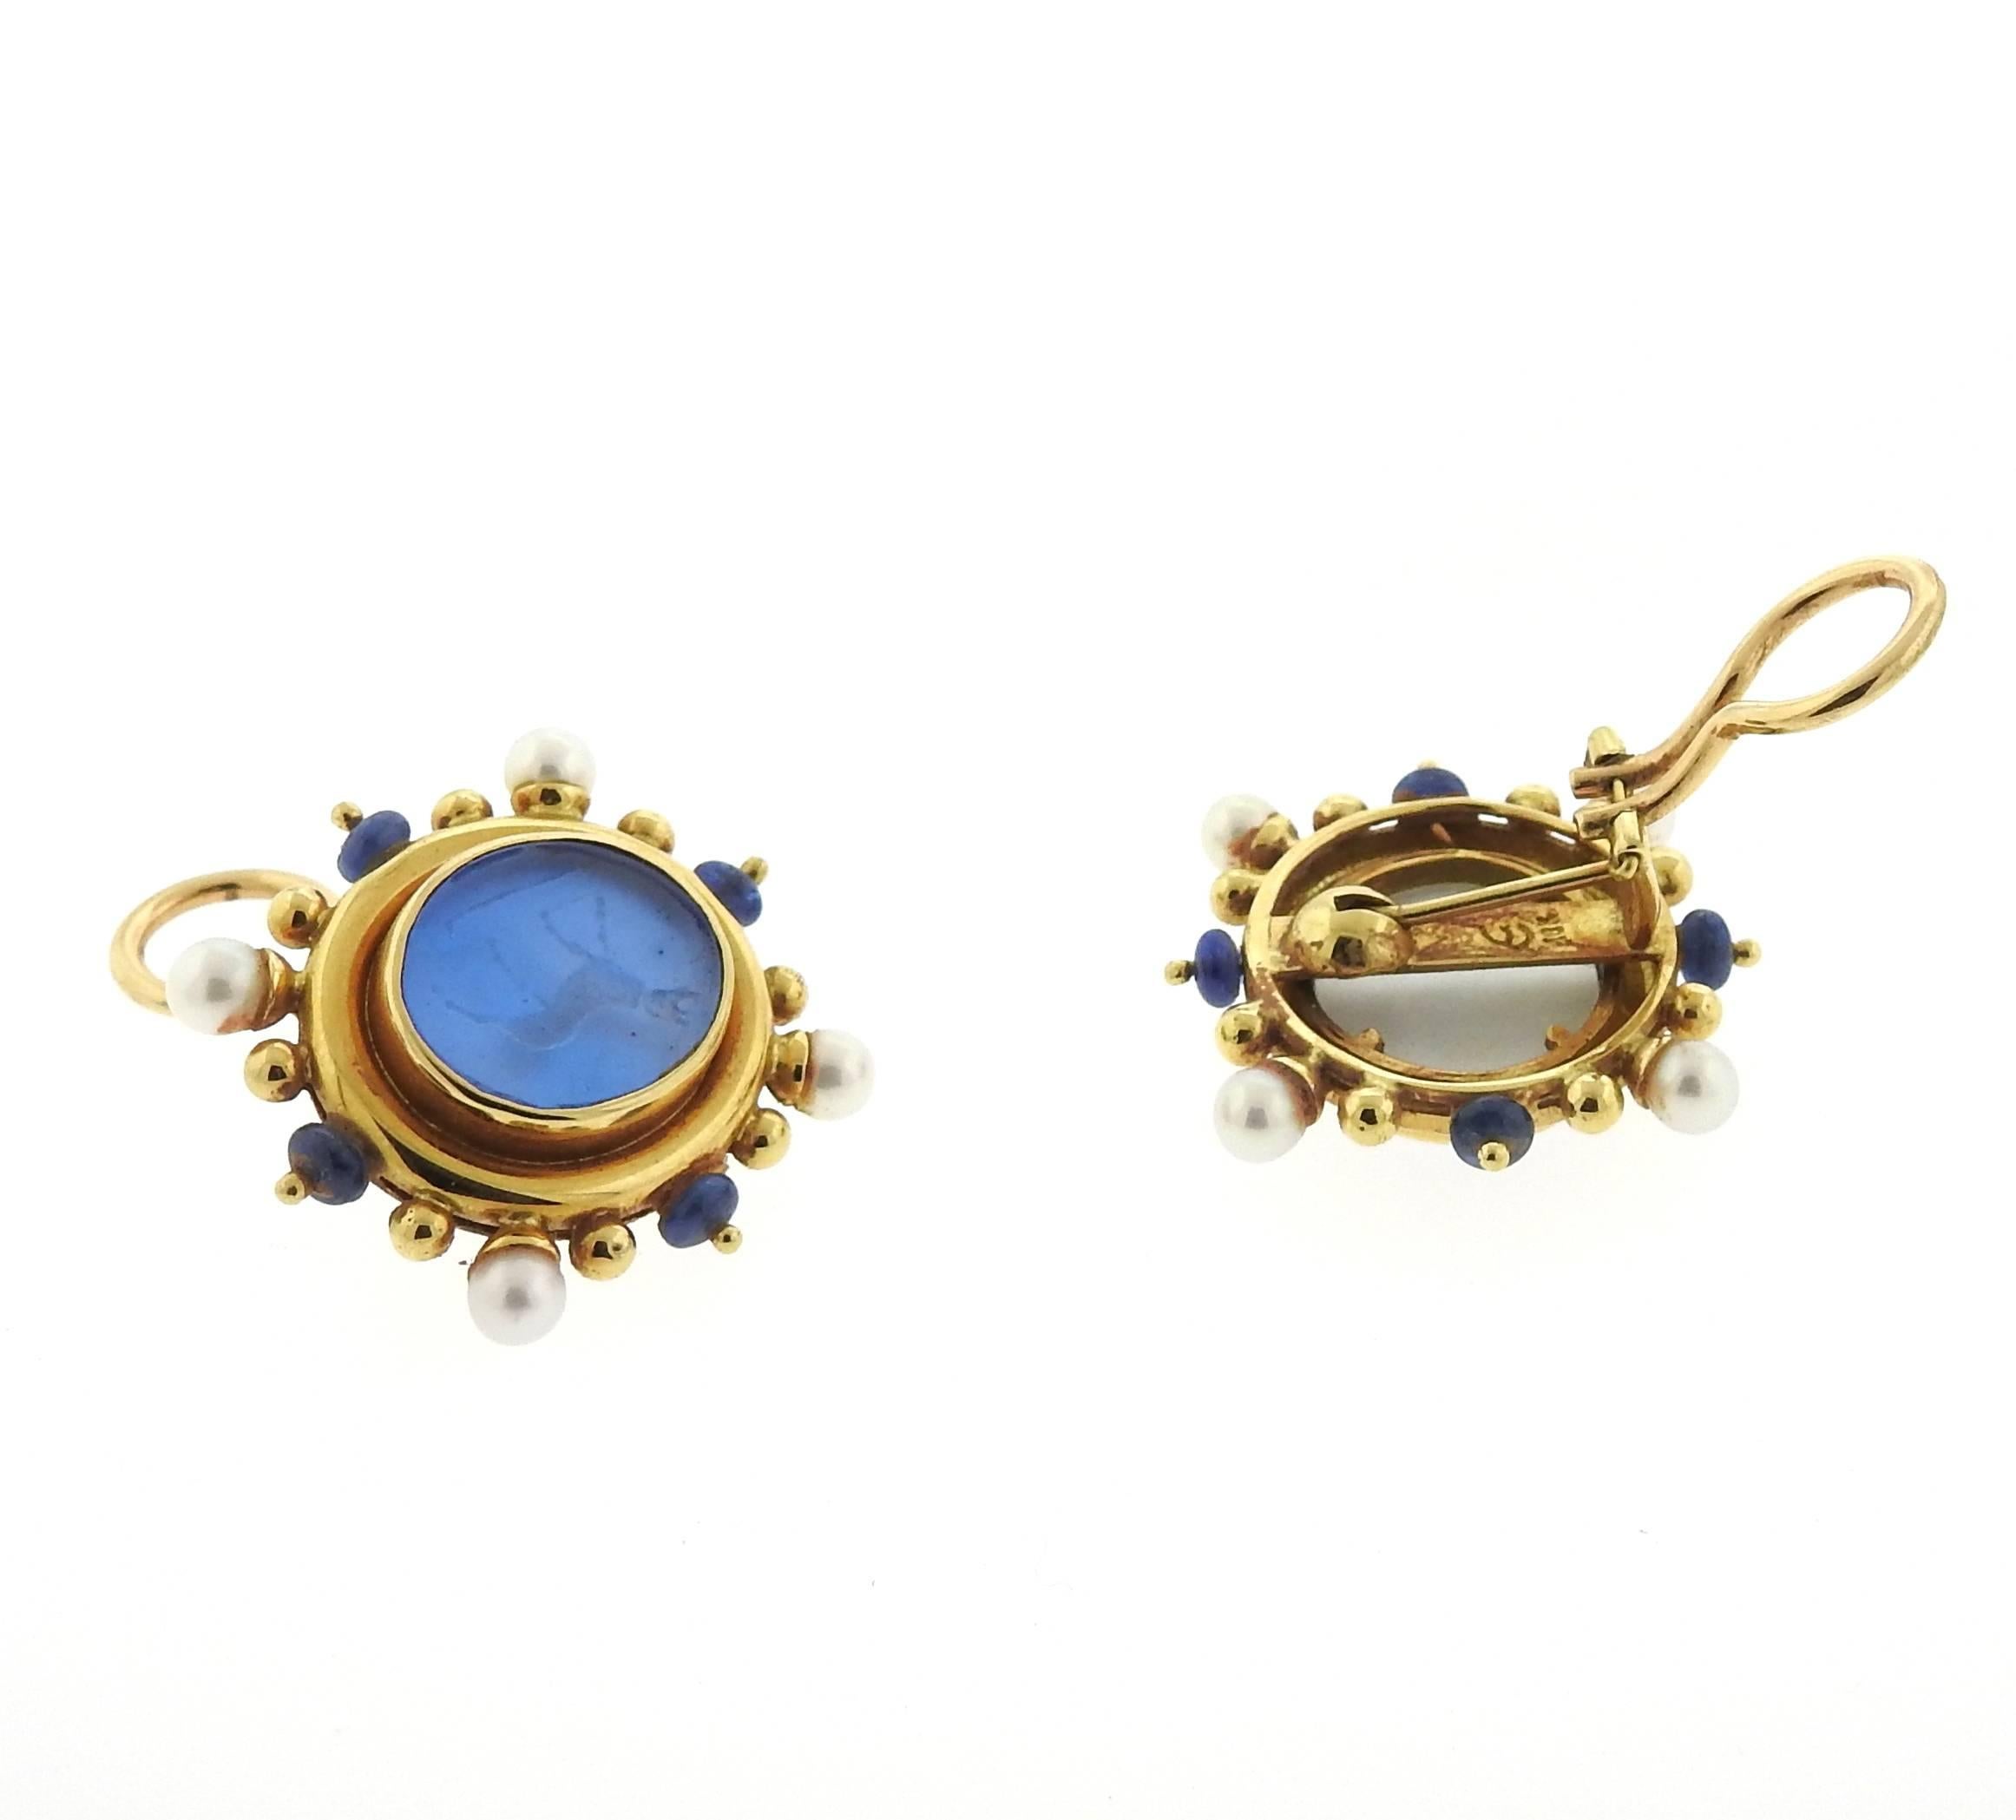 A pair of 18k yellow gold earrings, crafted by Elizabeth Locke, decorated with Venetian glass intaglio, backed with mother of pearl, surrounded with blue sapphires and pearls. Earrings are 26mm x 29mm, collapsible posts. Marked: Locke hallmark, 18k.